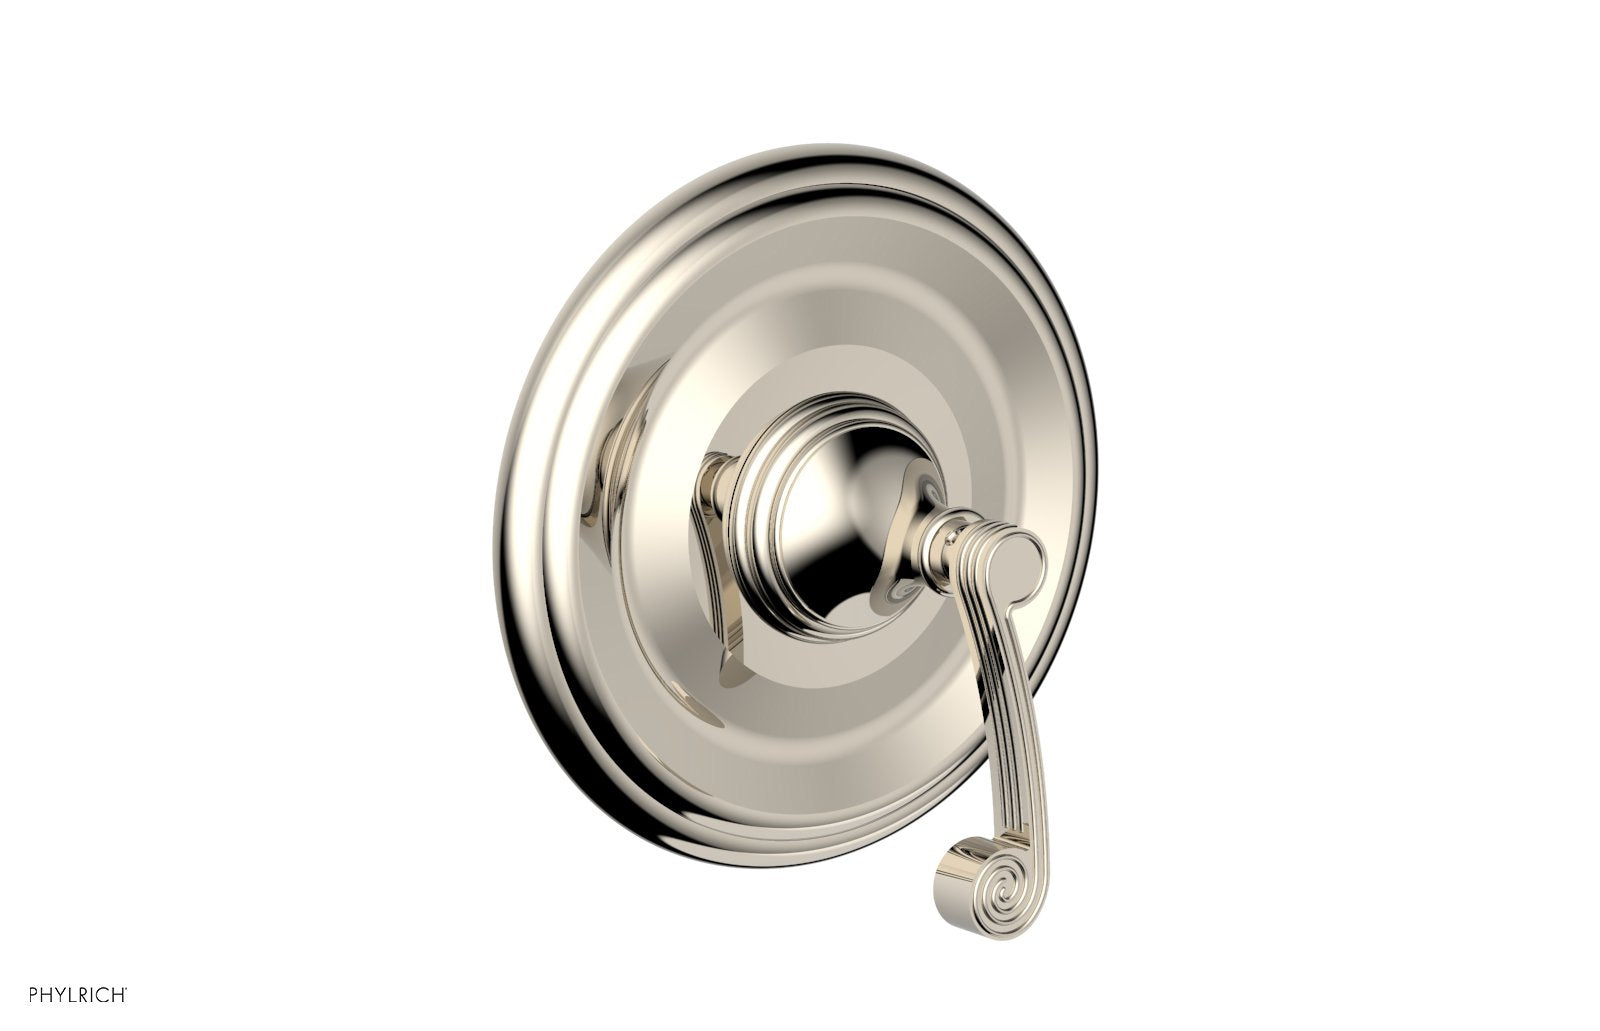 Phylrich 3RING Thermostatic Shower Trim - Curved Lever Handle